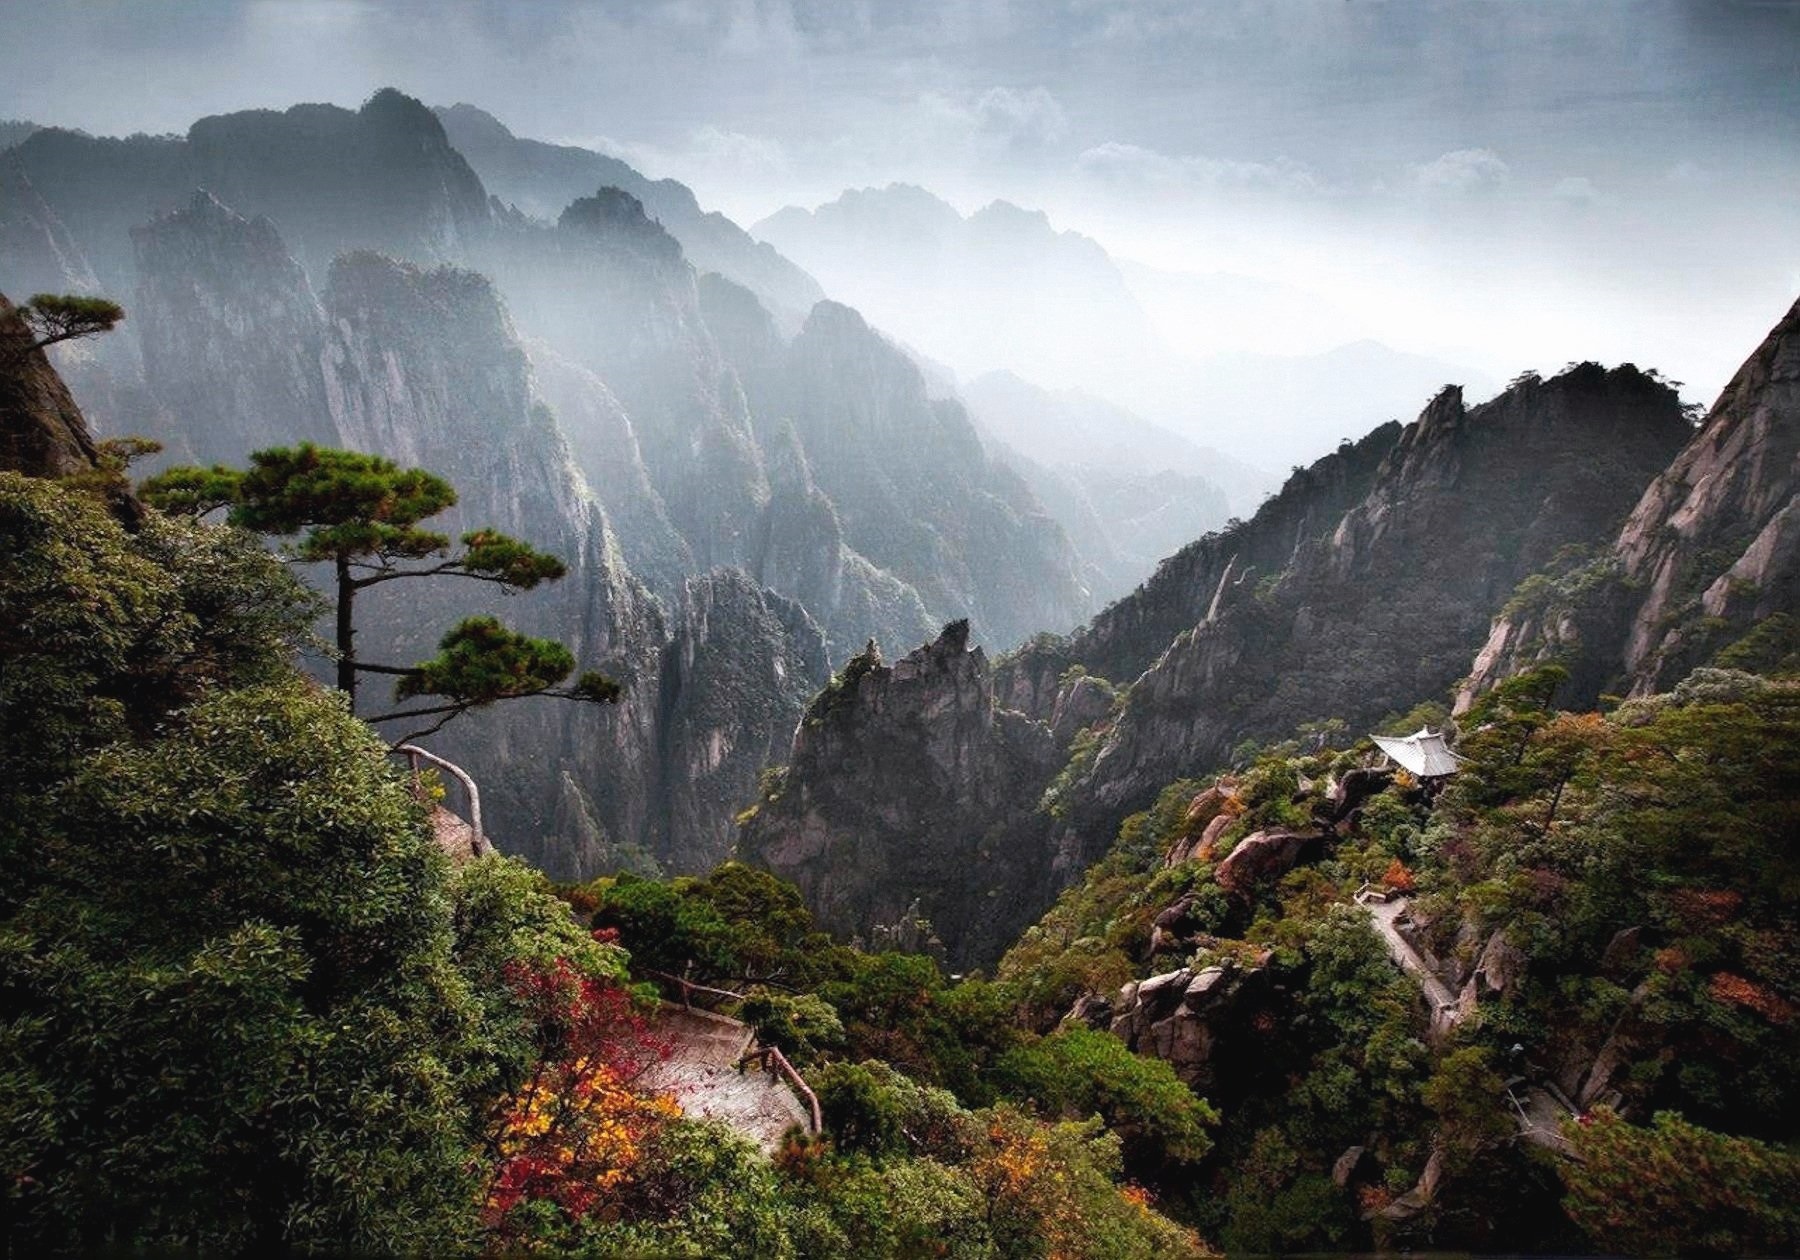 00 Mikhail Vorobyov. The mountain chain of Huangshan, China. 2015